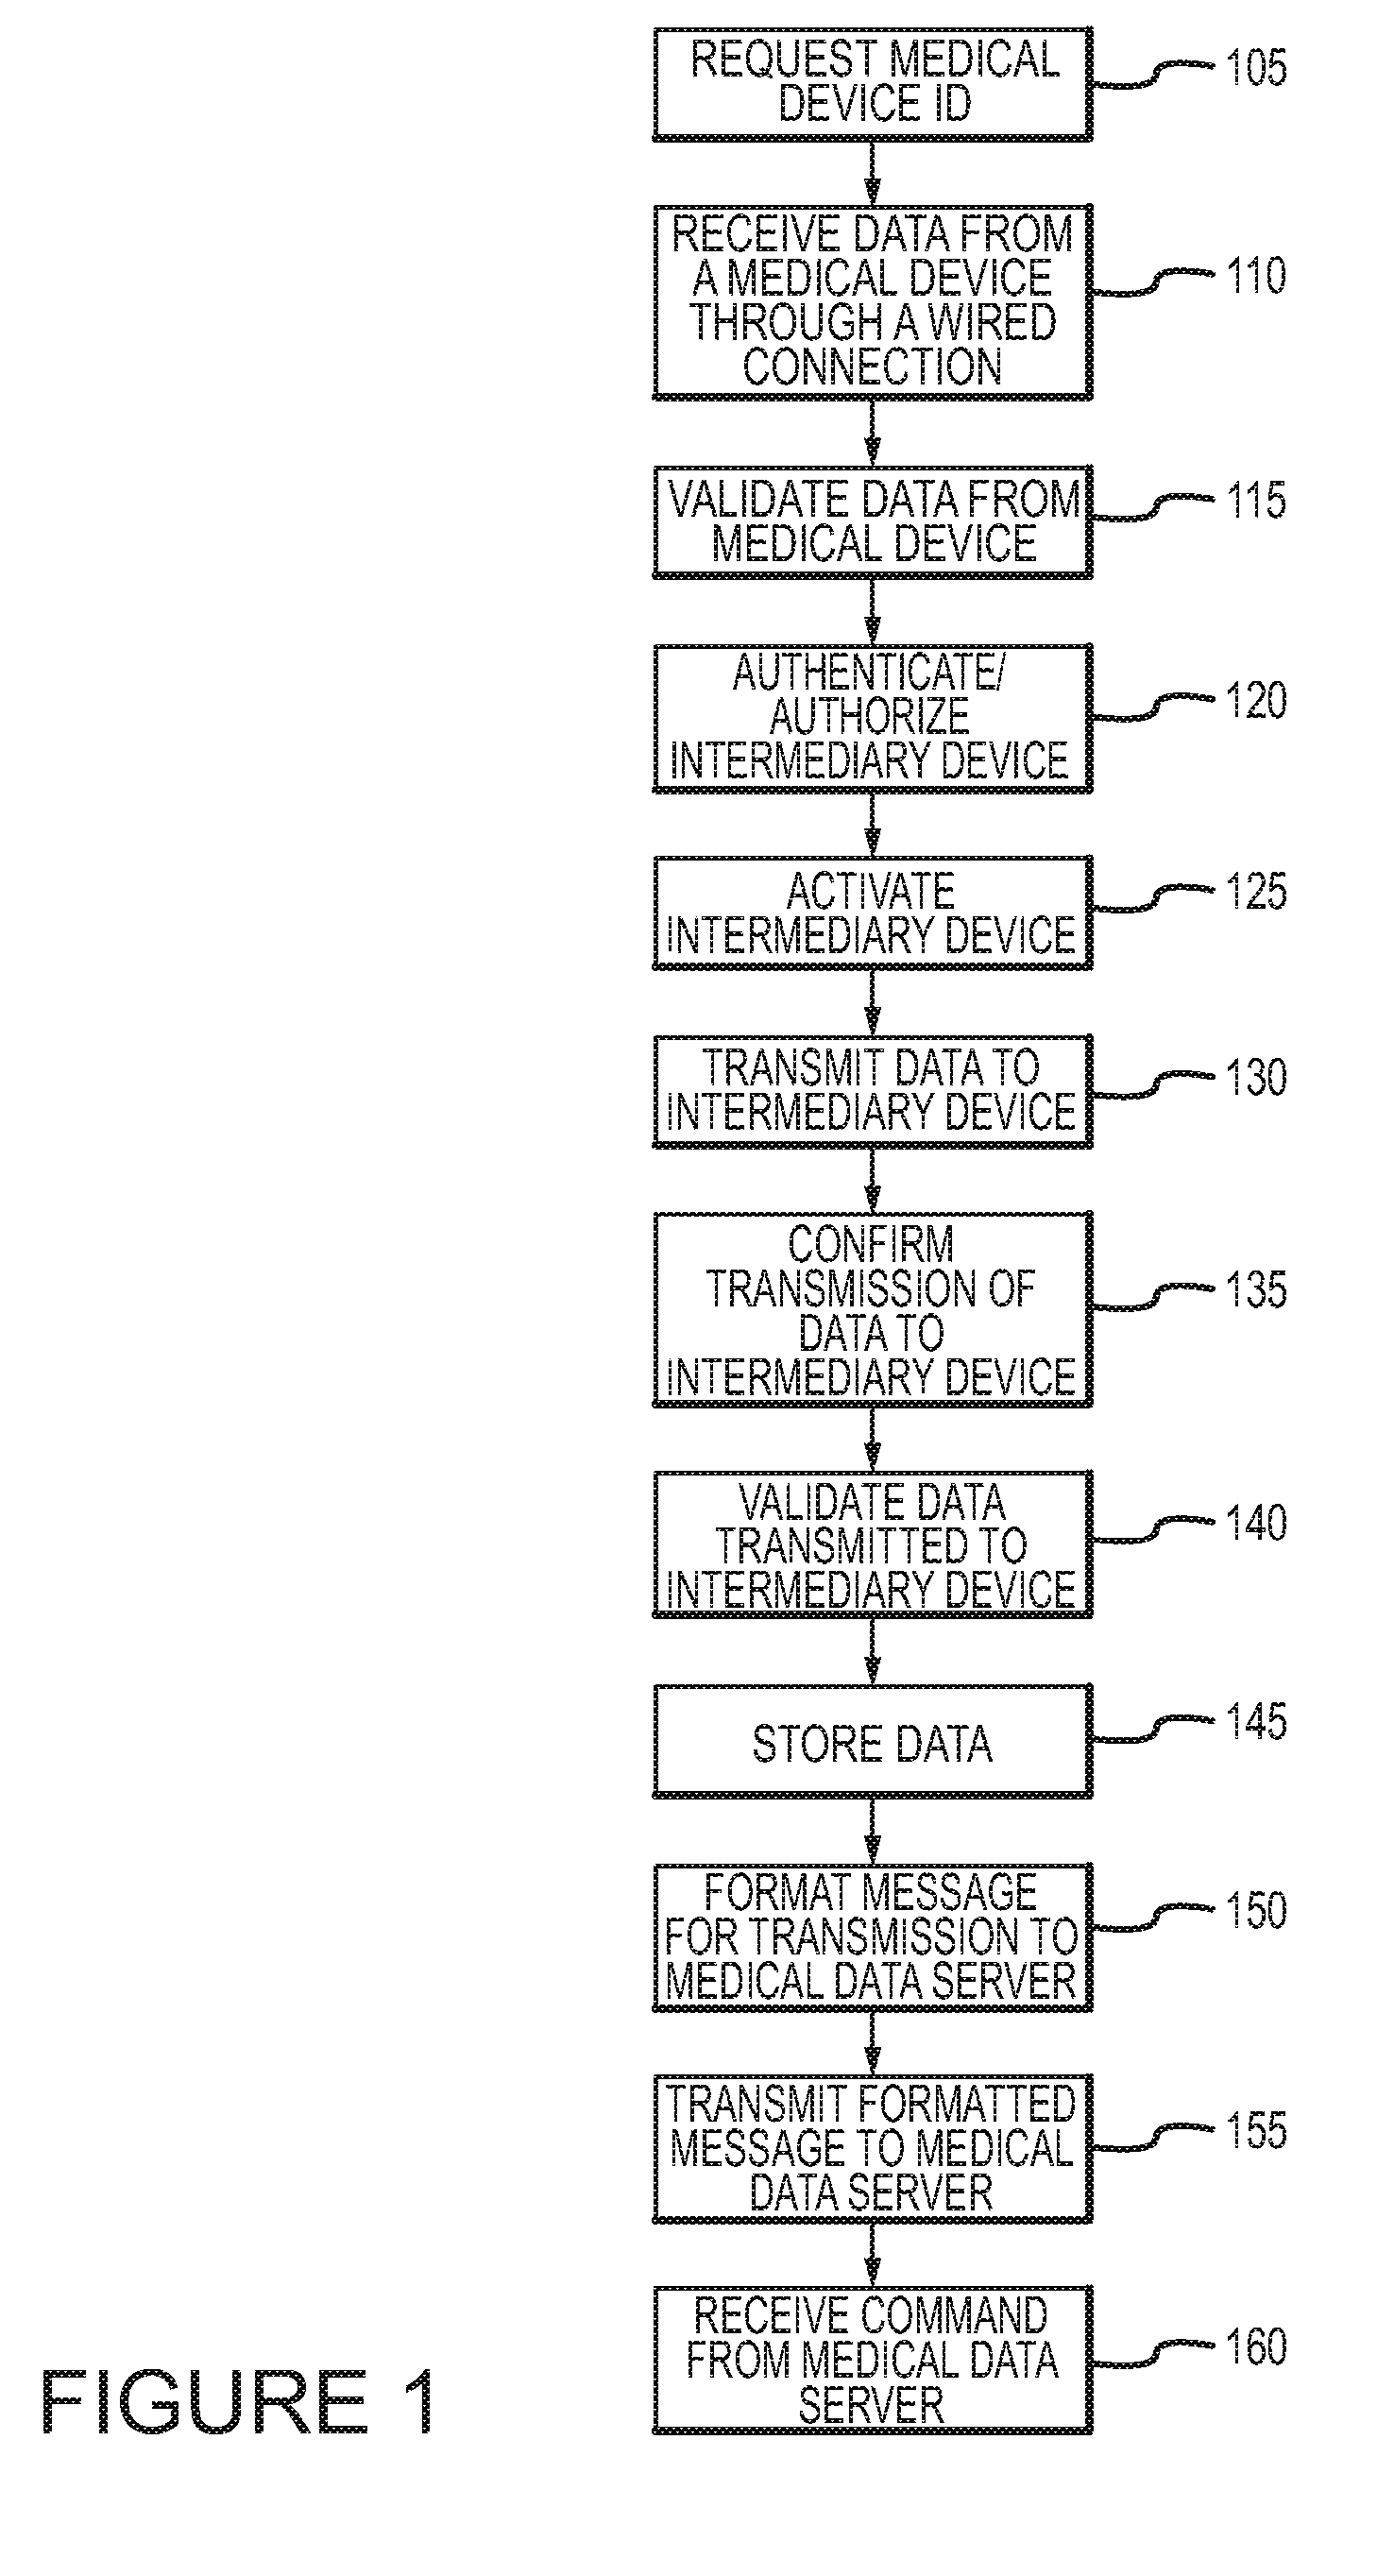 Systems and methods for medical data interchange using mobile computing devices